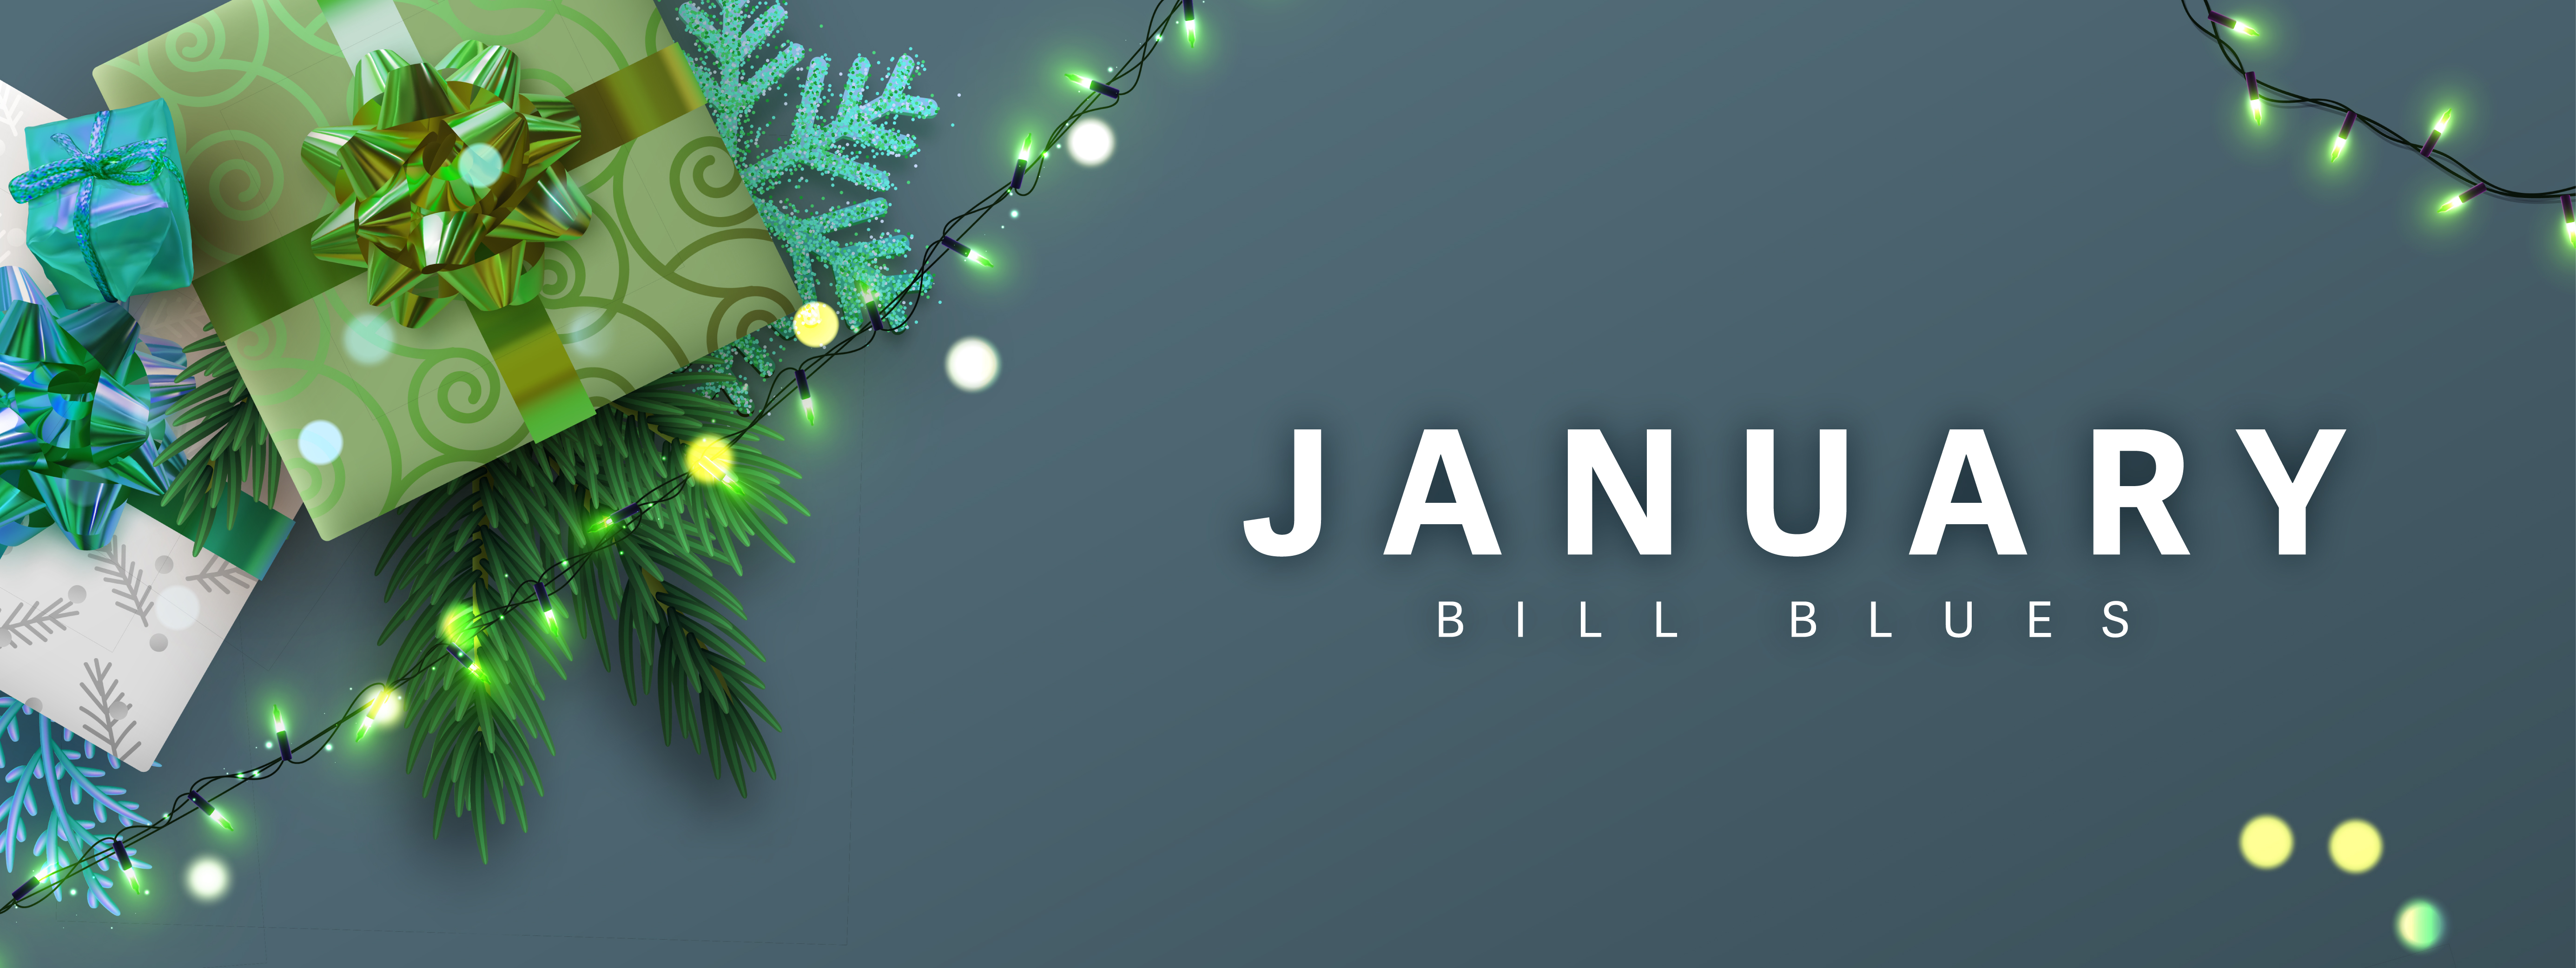 January Bill Blues with Presents background